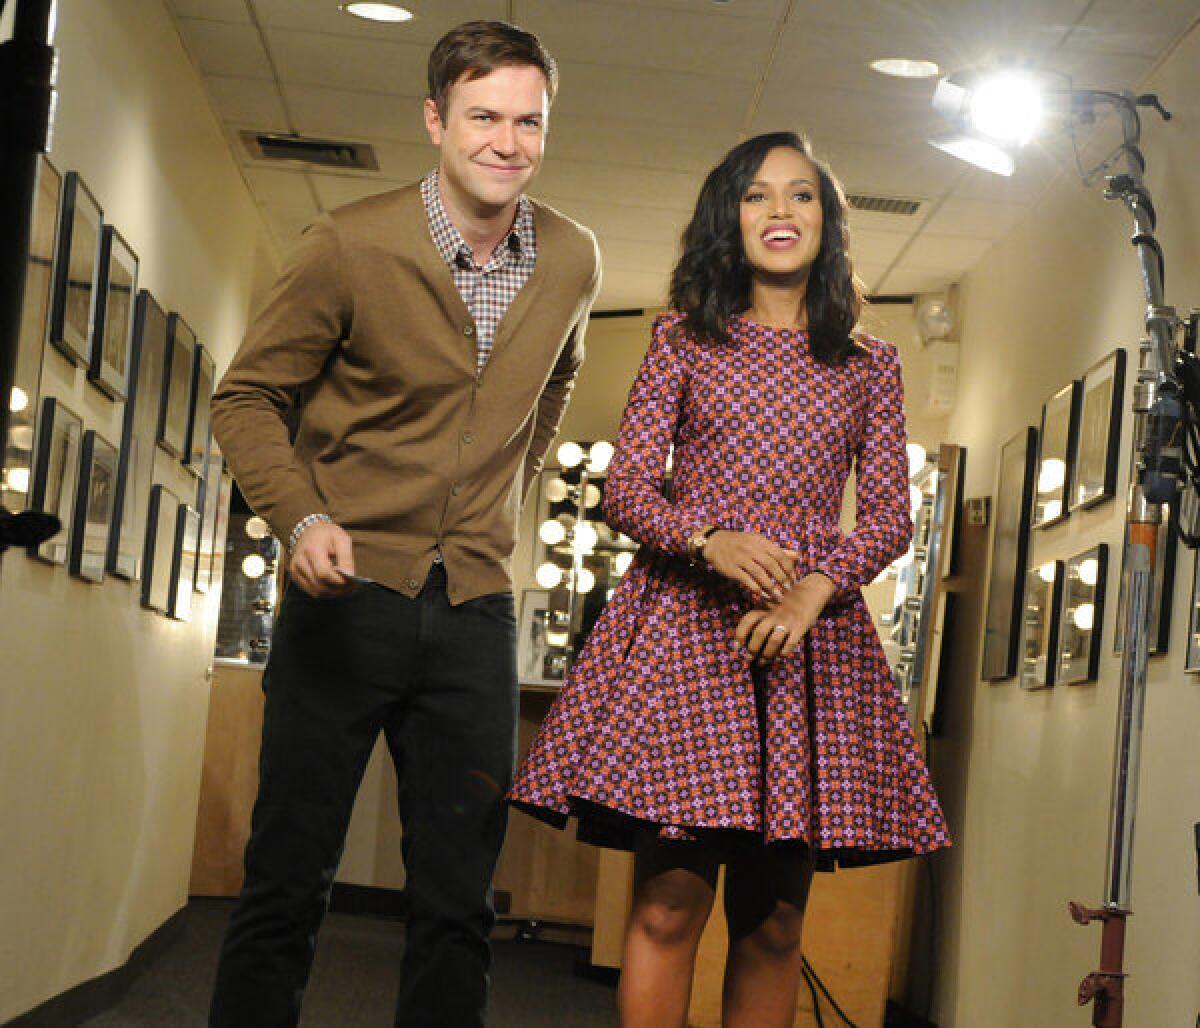 Kerry Washington, right, is seen with cast member Taran Killam during a promotional shoot for "Saturday Night Live" in New York.